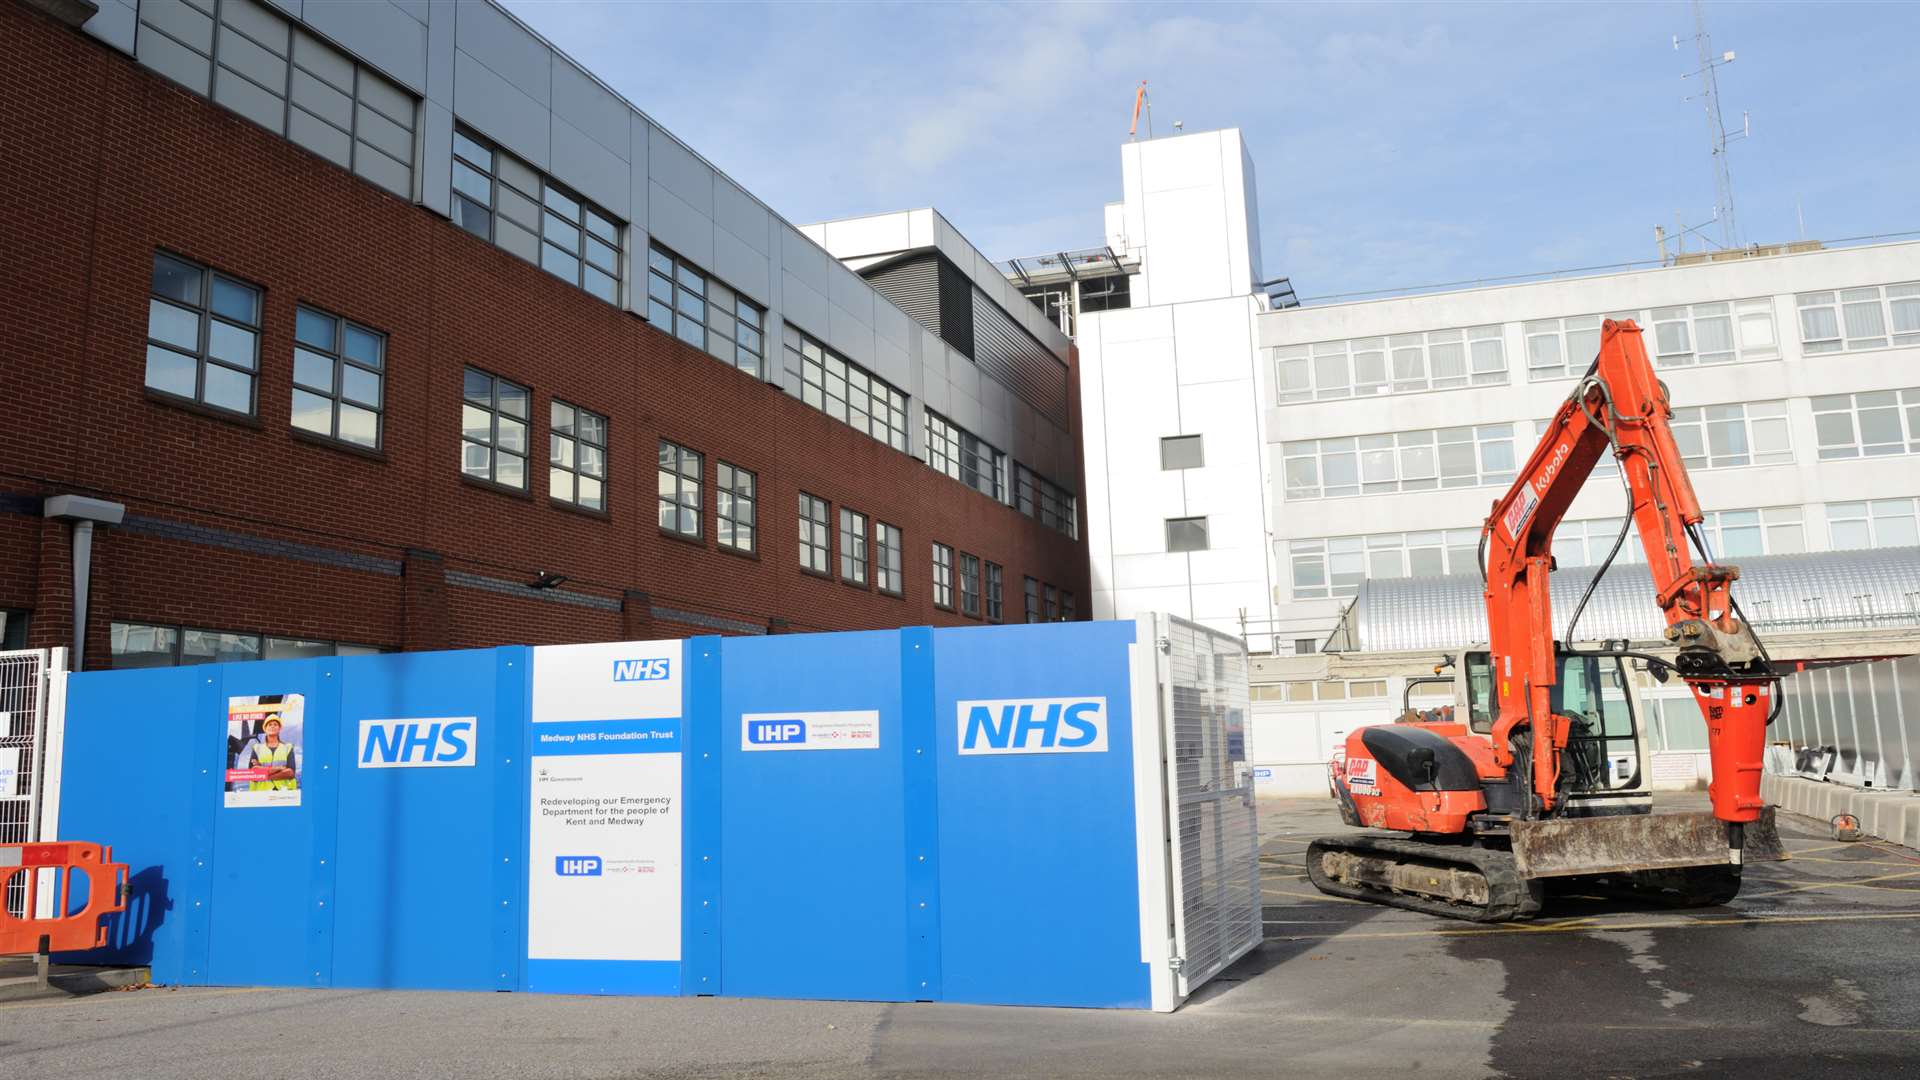 Work taking place at A&E